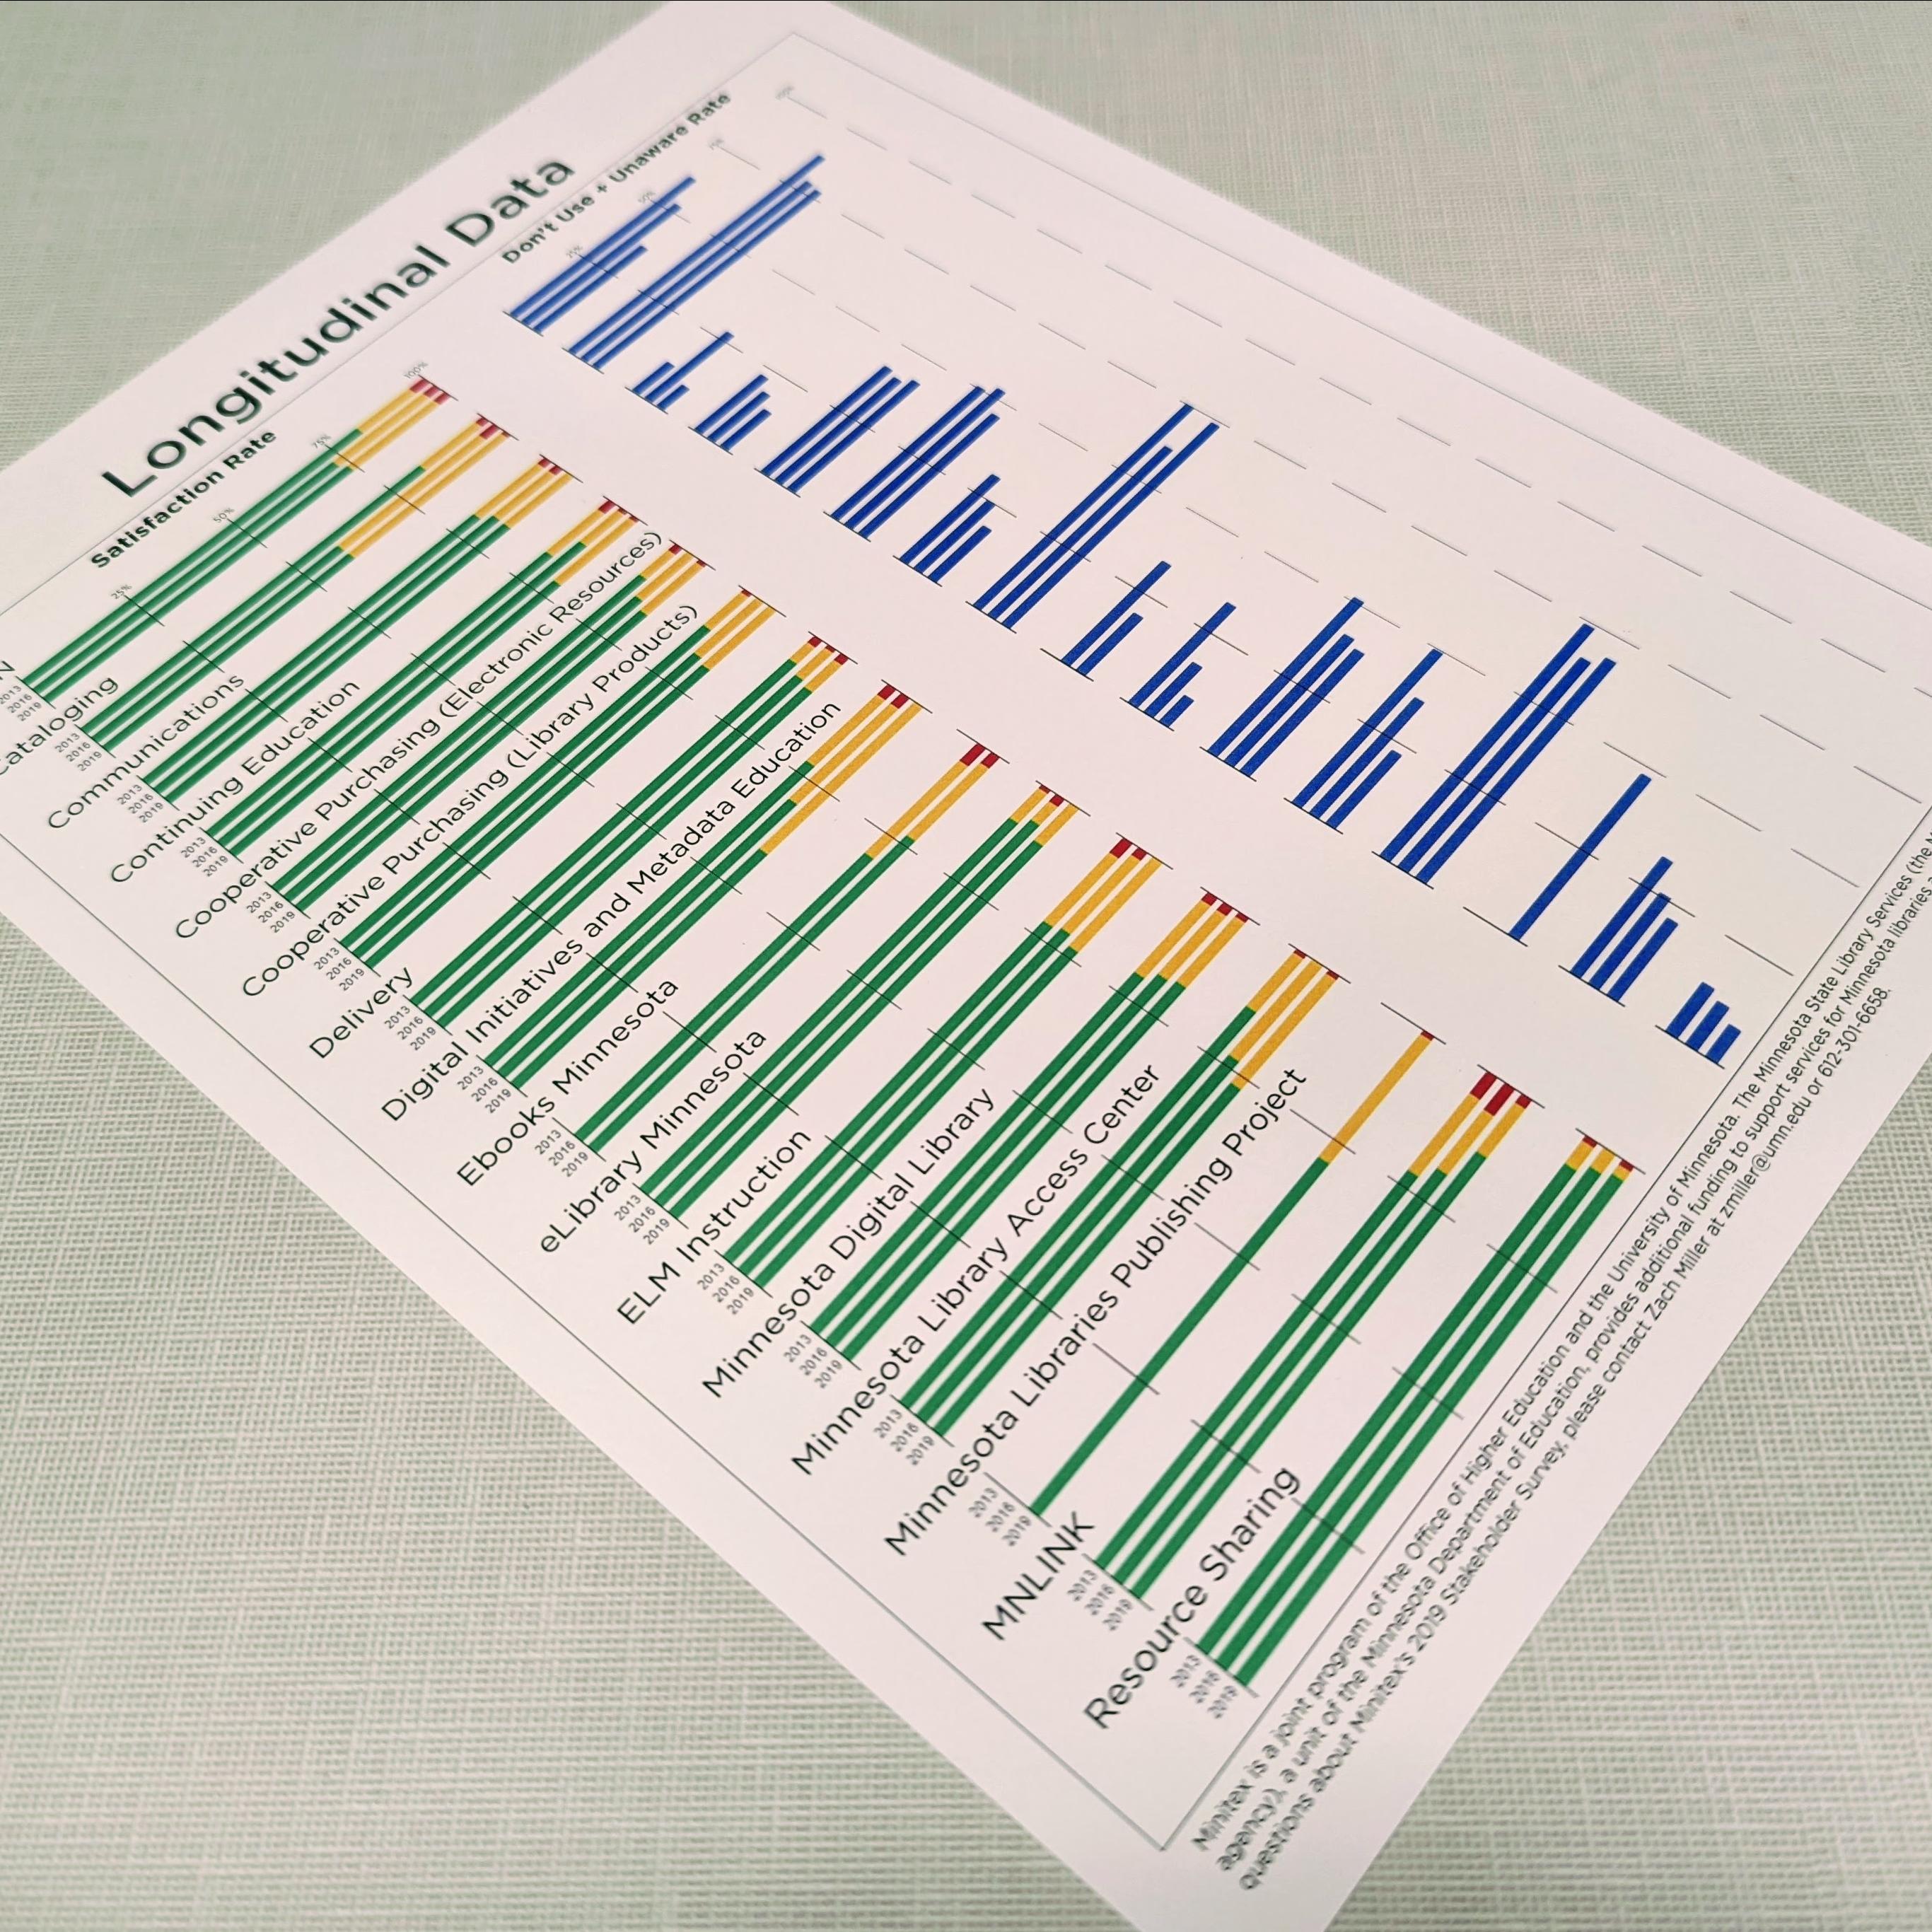 A photograph of a piece of paper covered with bar multicolored bar charts.